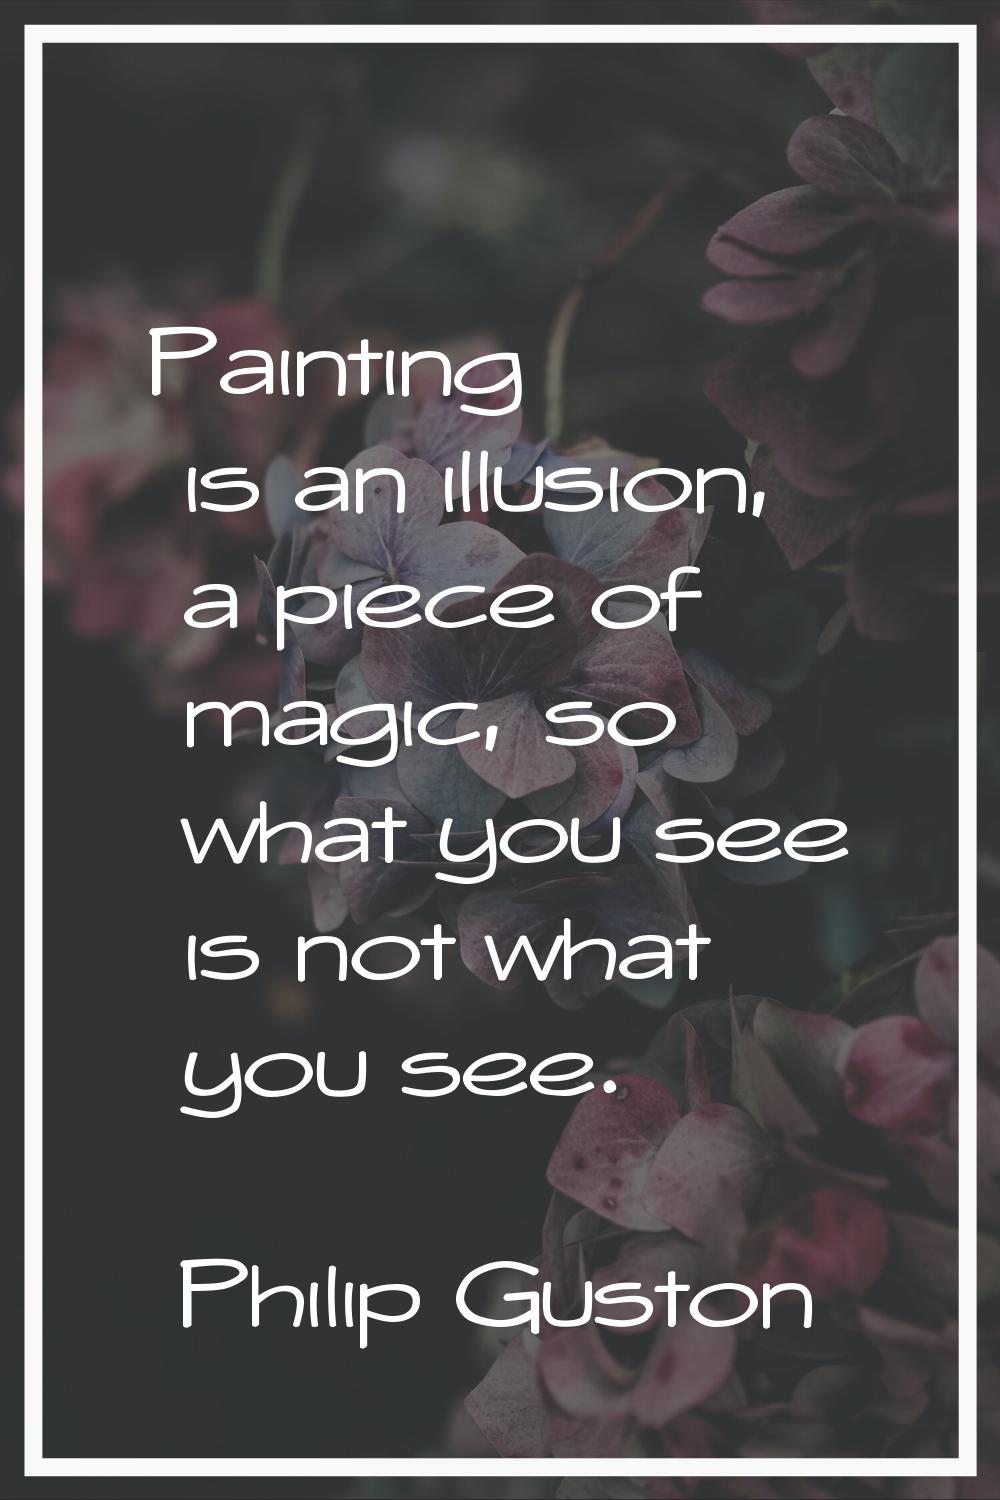 Painting is an illusion, a piece of magic, so what you see is not what you see.